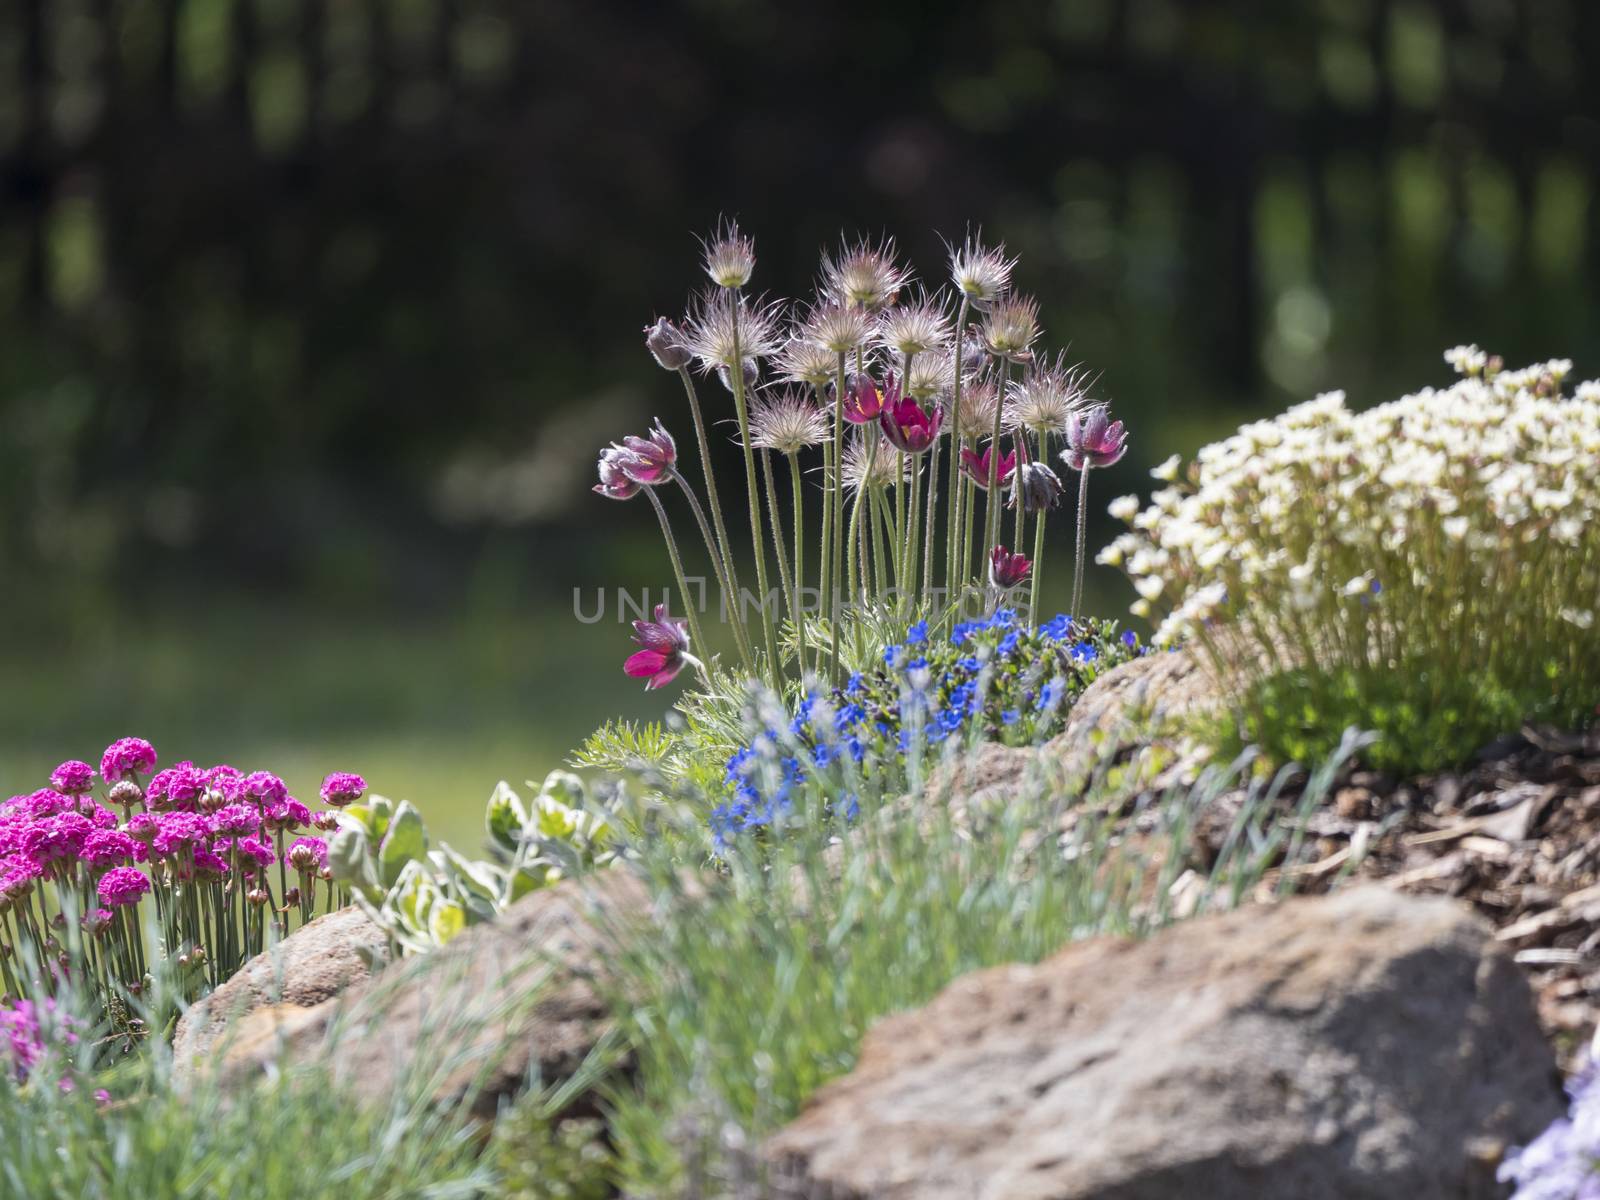 spring rock garden in full bloom with Pulsatilla pratensis purple violet flowers, pink Phlox, Armeria maritima, sea thrift, Bergenia or elephants ears, carnation and other colorful blooming flowers by Henkeova